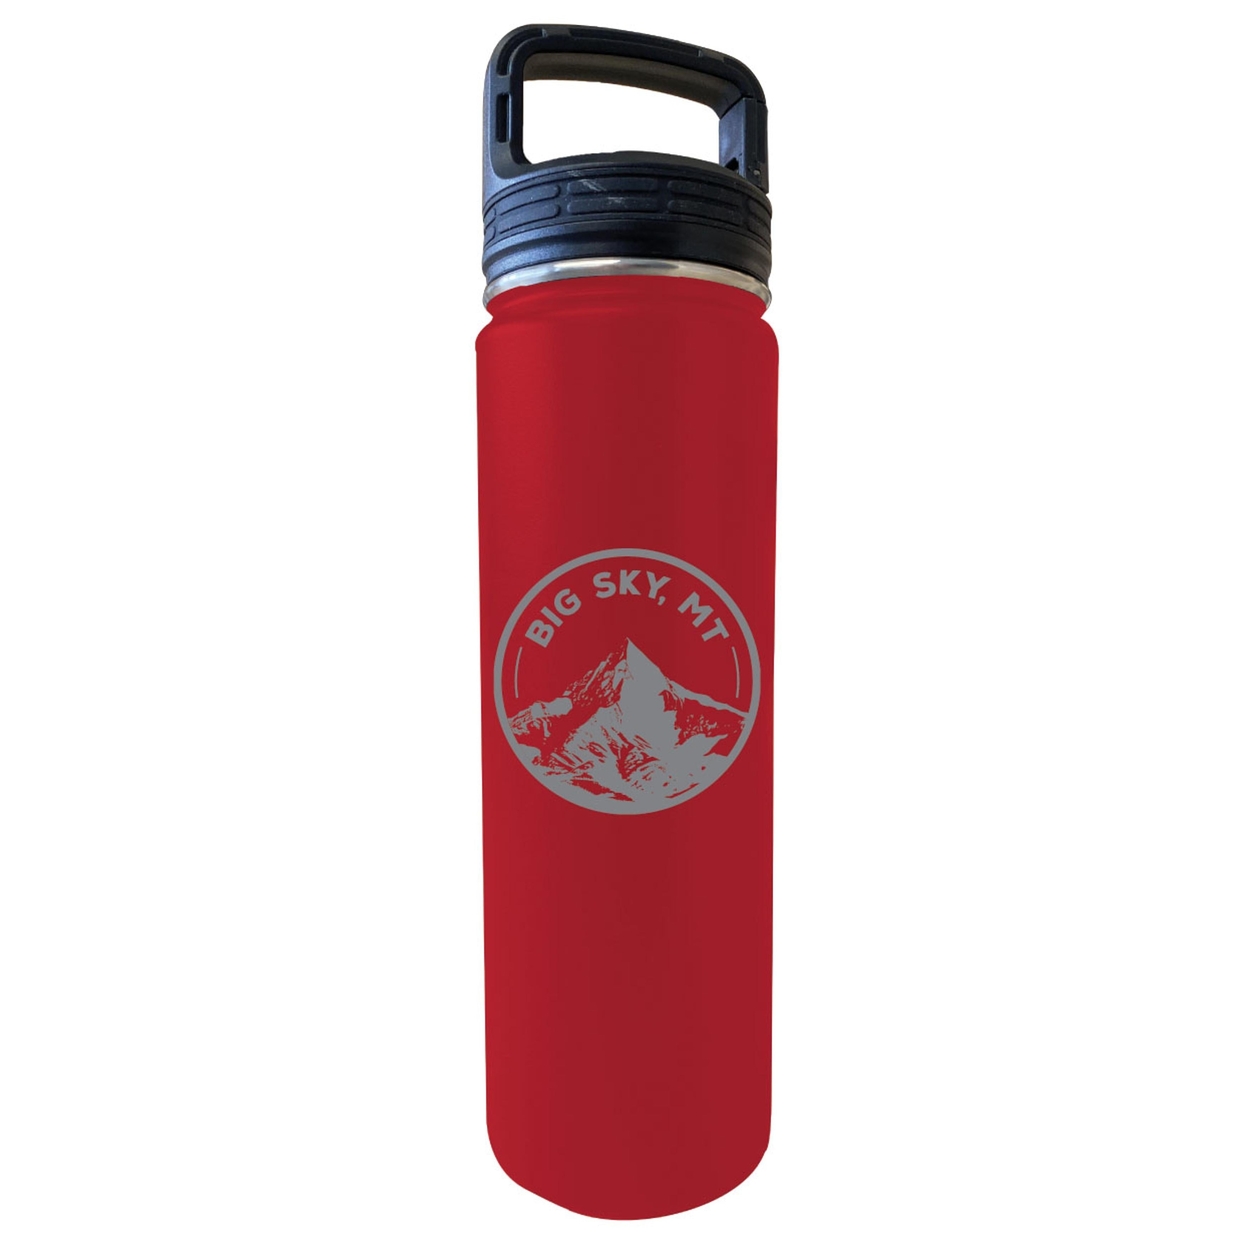 Big Sky Montana Souvenir 32 Oz Engraved Insulated Stainless Steel Tumbler - Red,,2-Pack